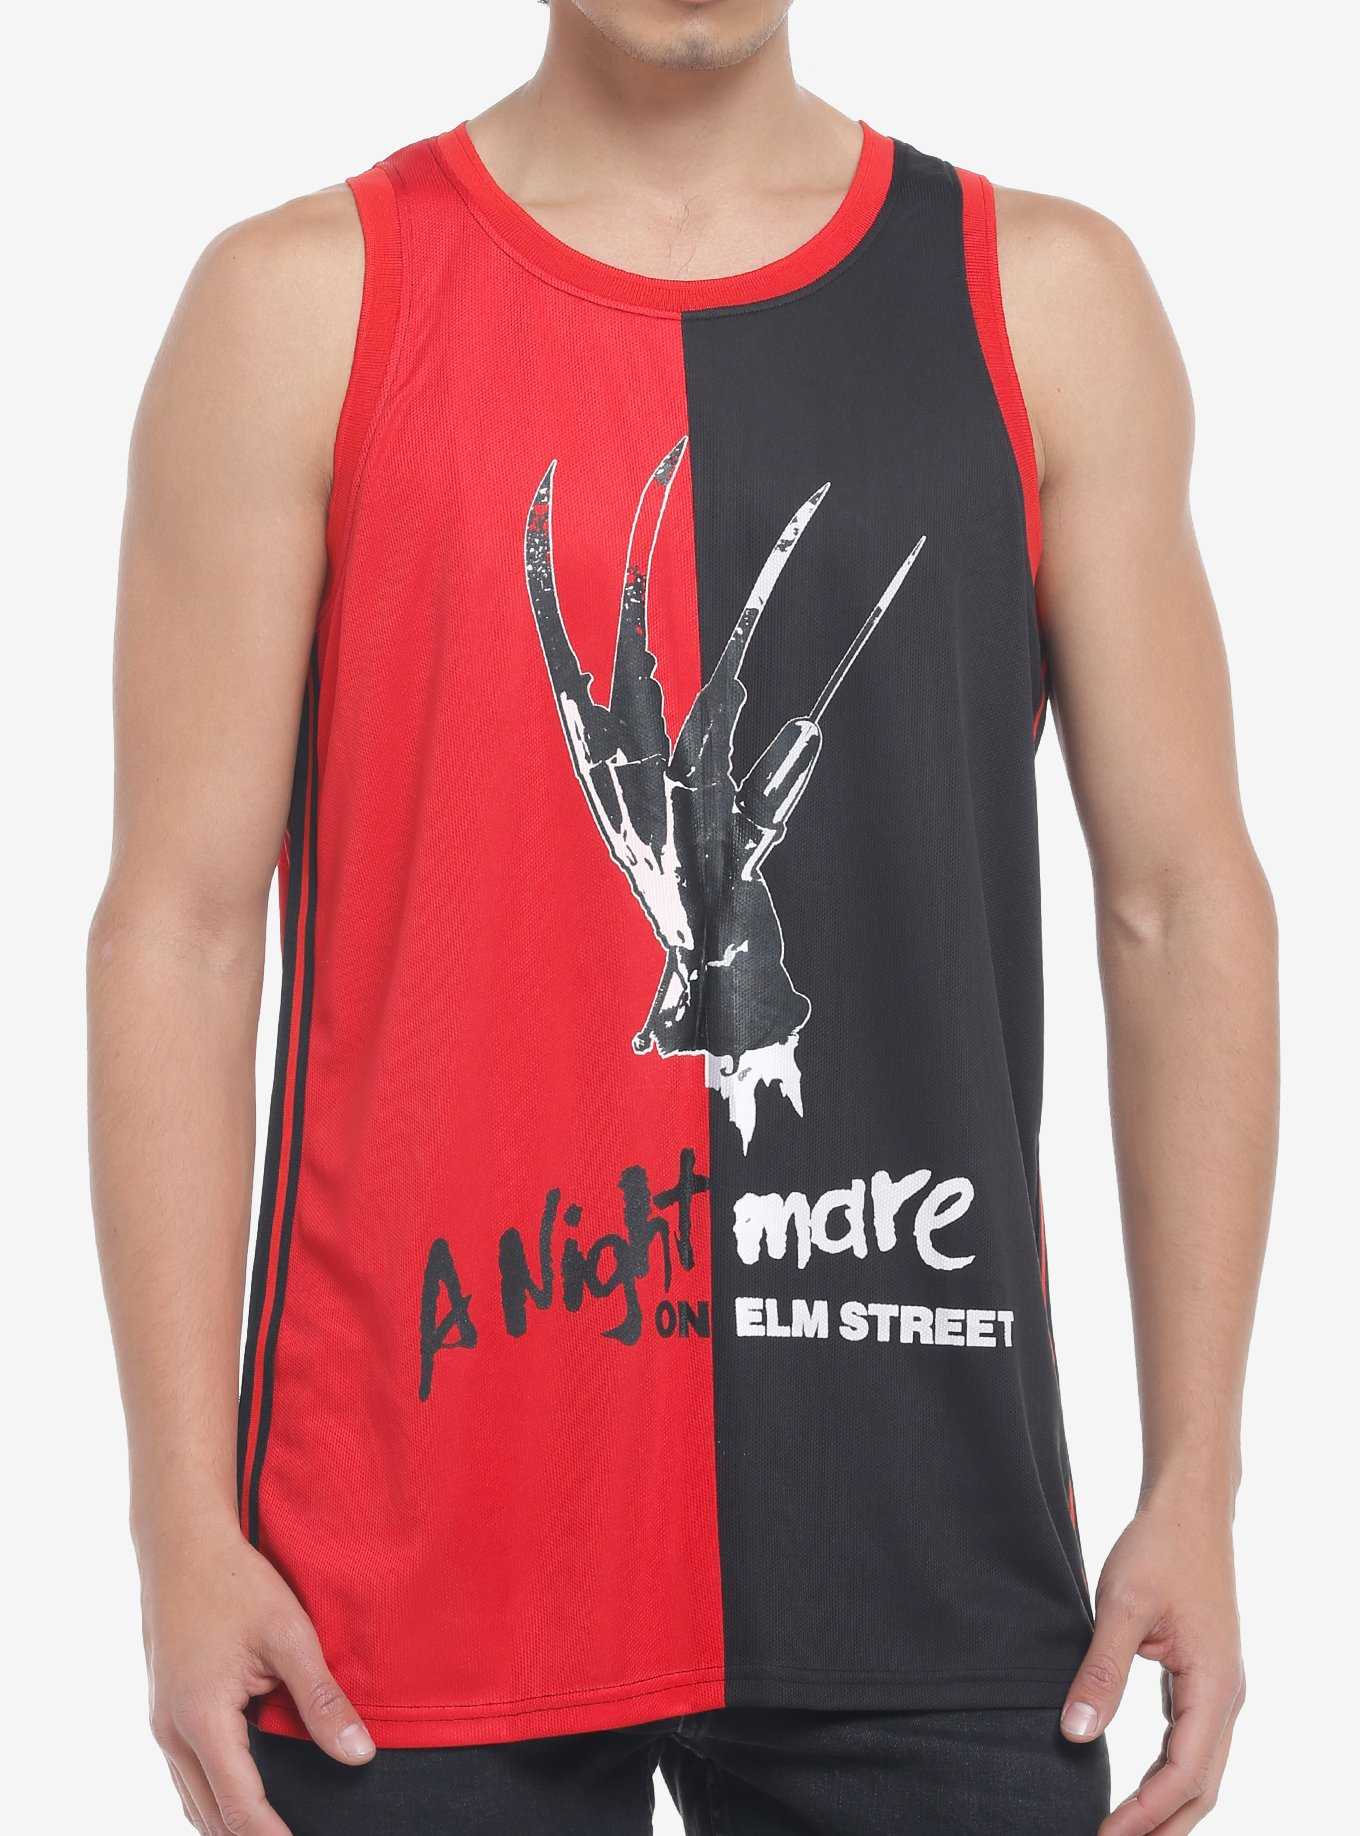 Graphic Tank Tops for Men: Bands, Anime & Disney